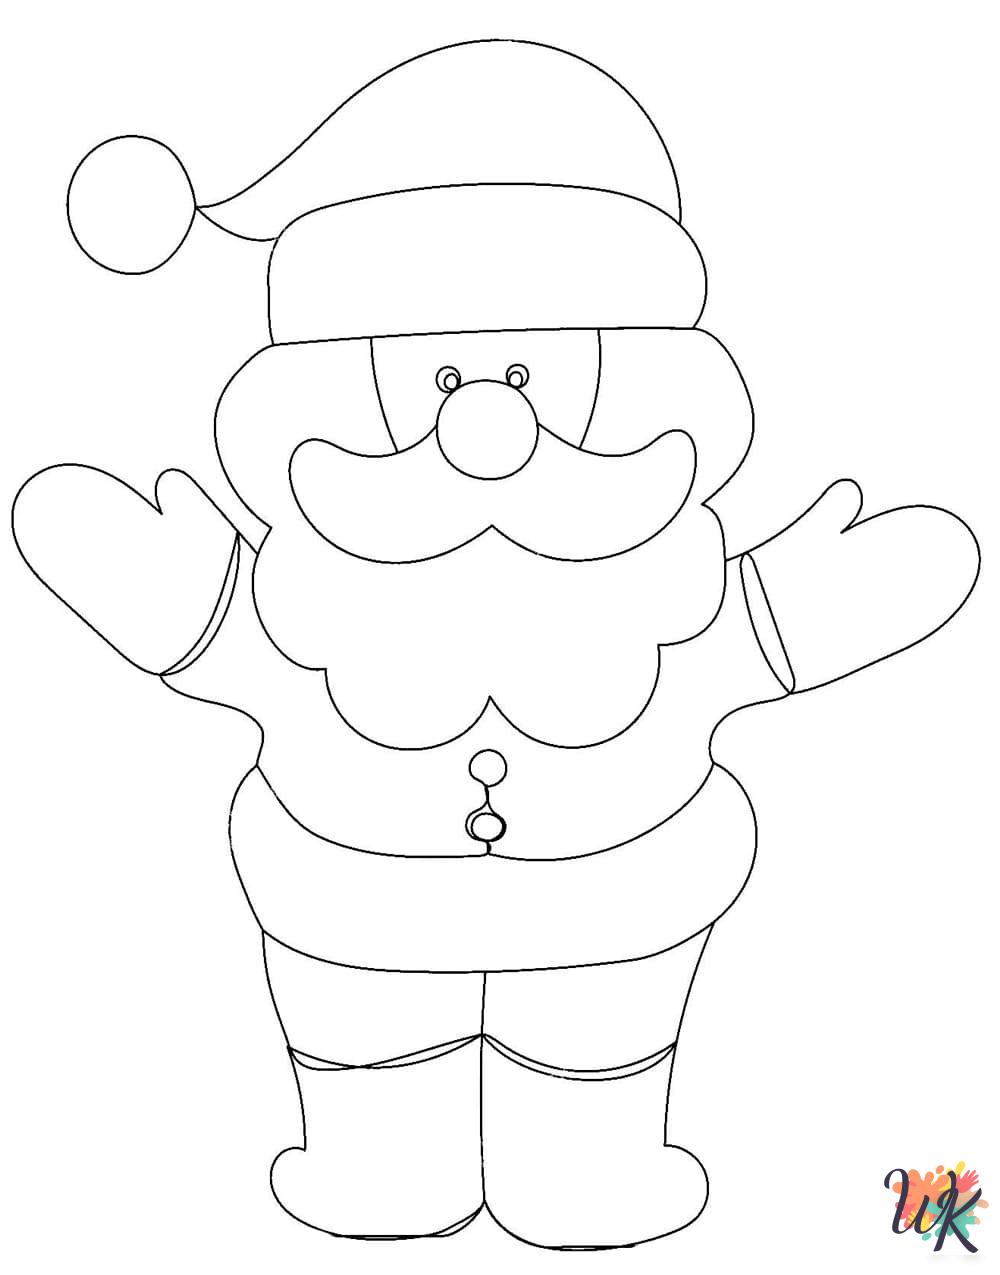 Santa coloring pages for adults